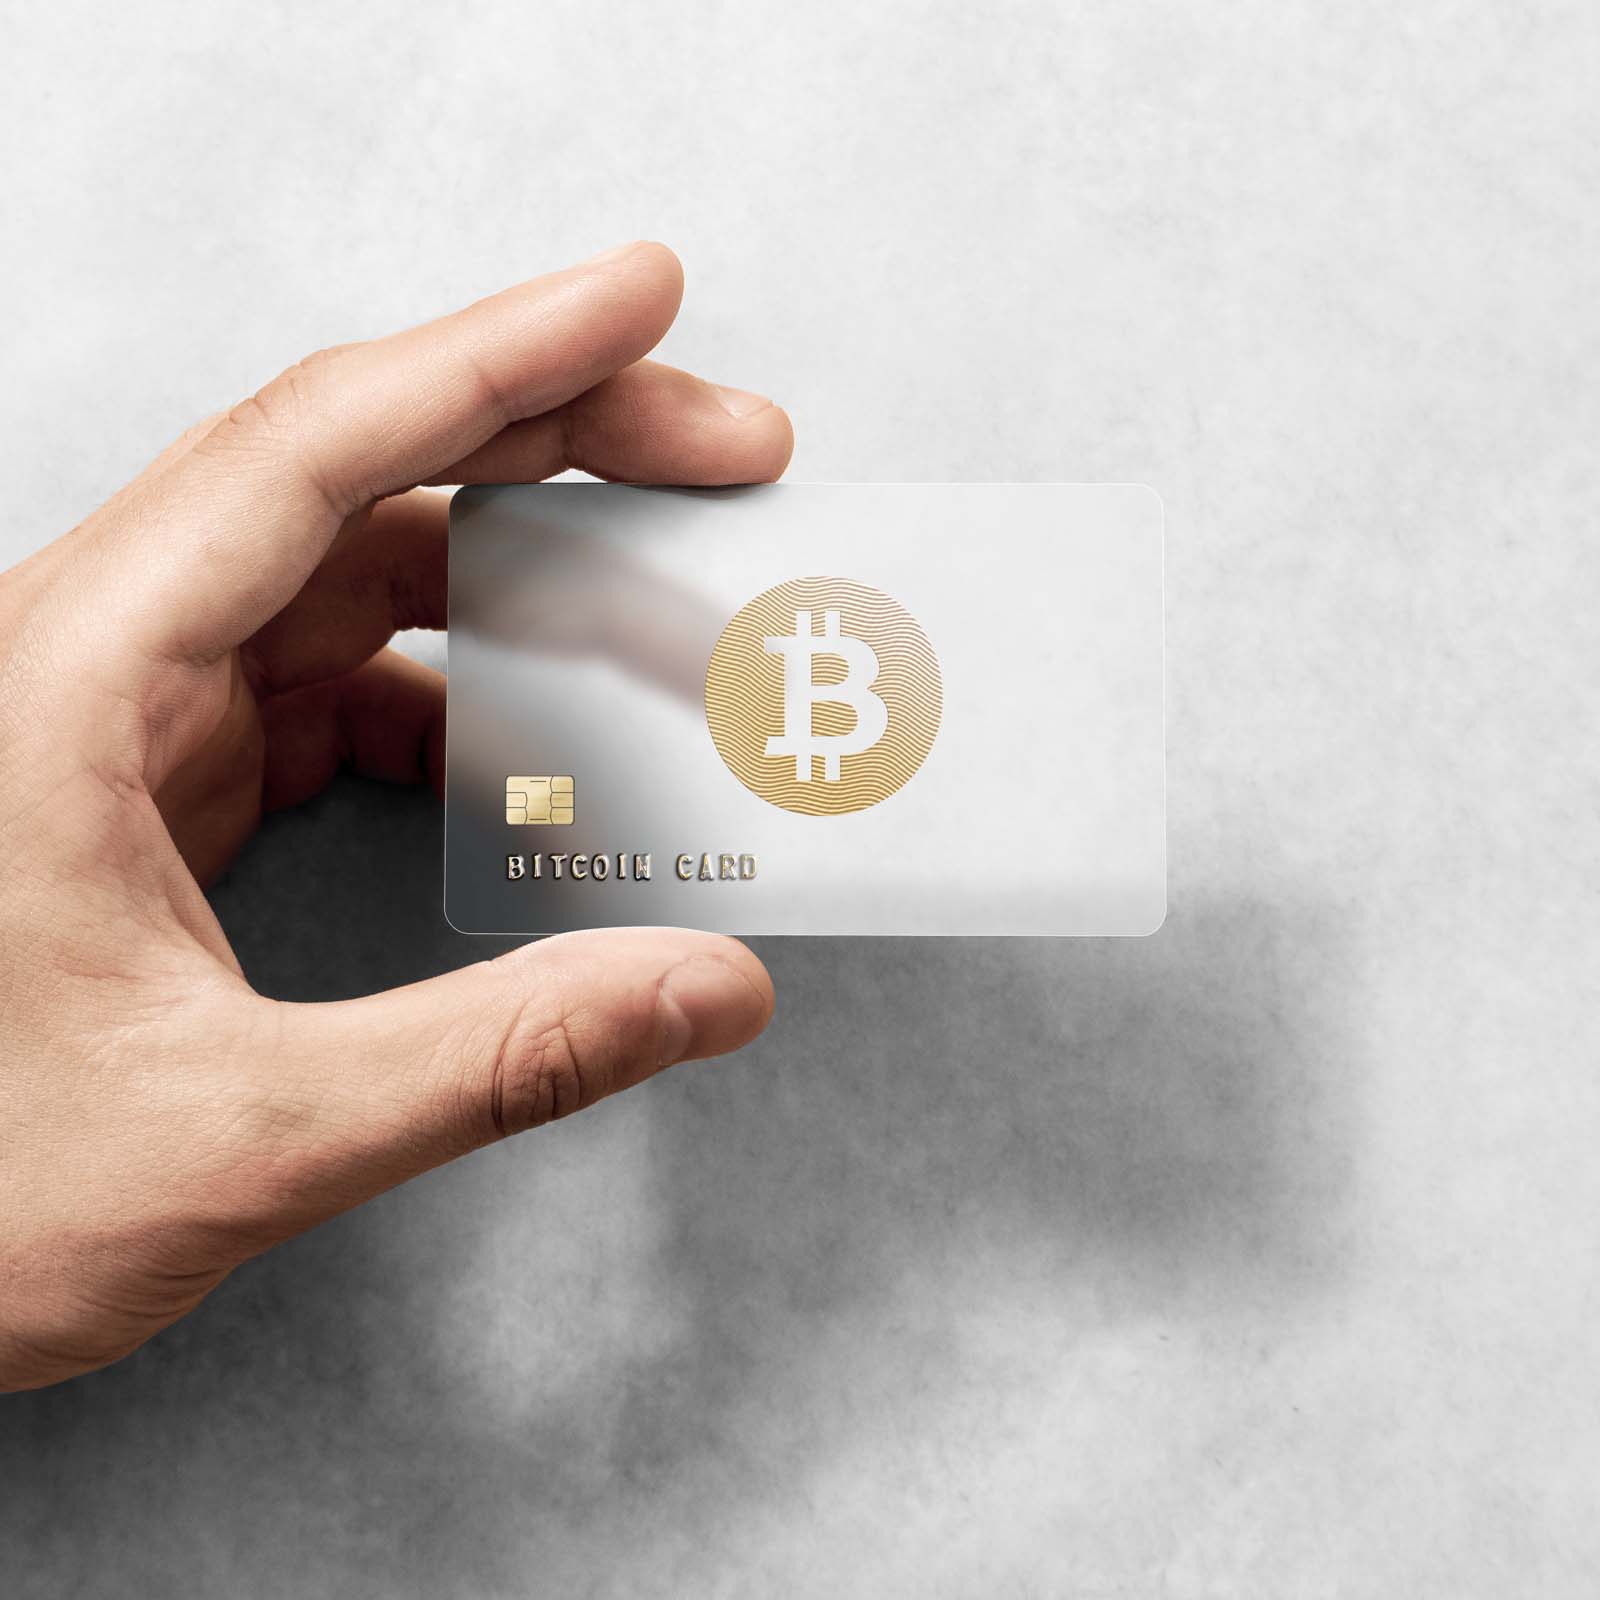 Buy bitcoins credit card europe how much is a bitcoin rn